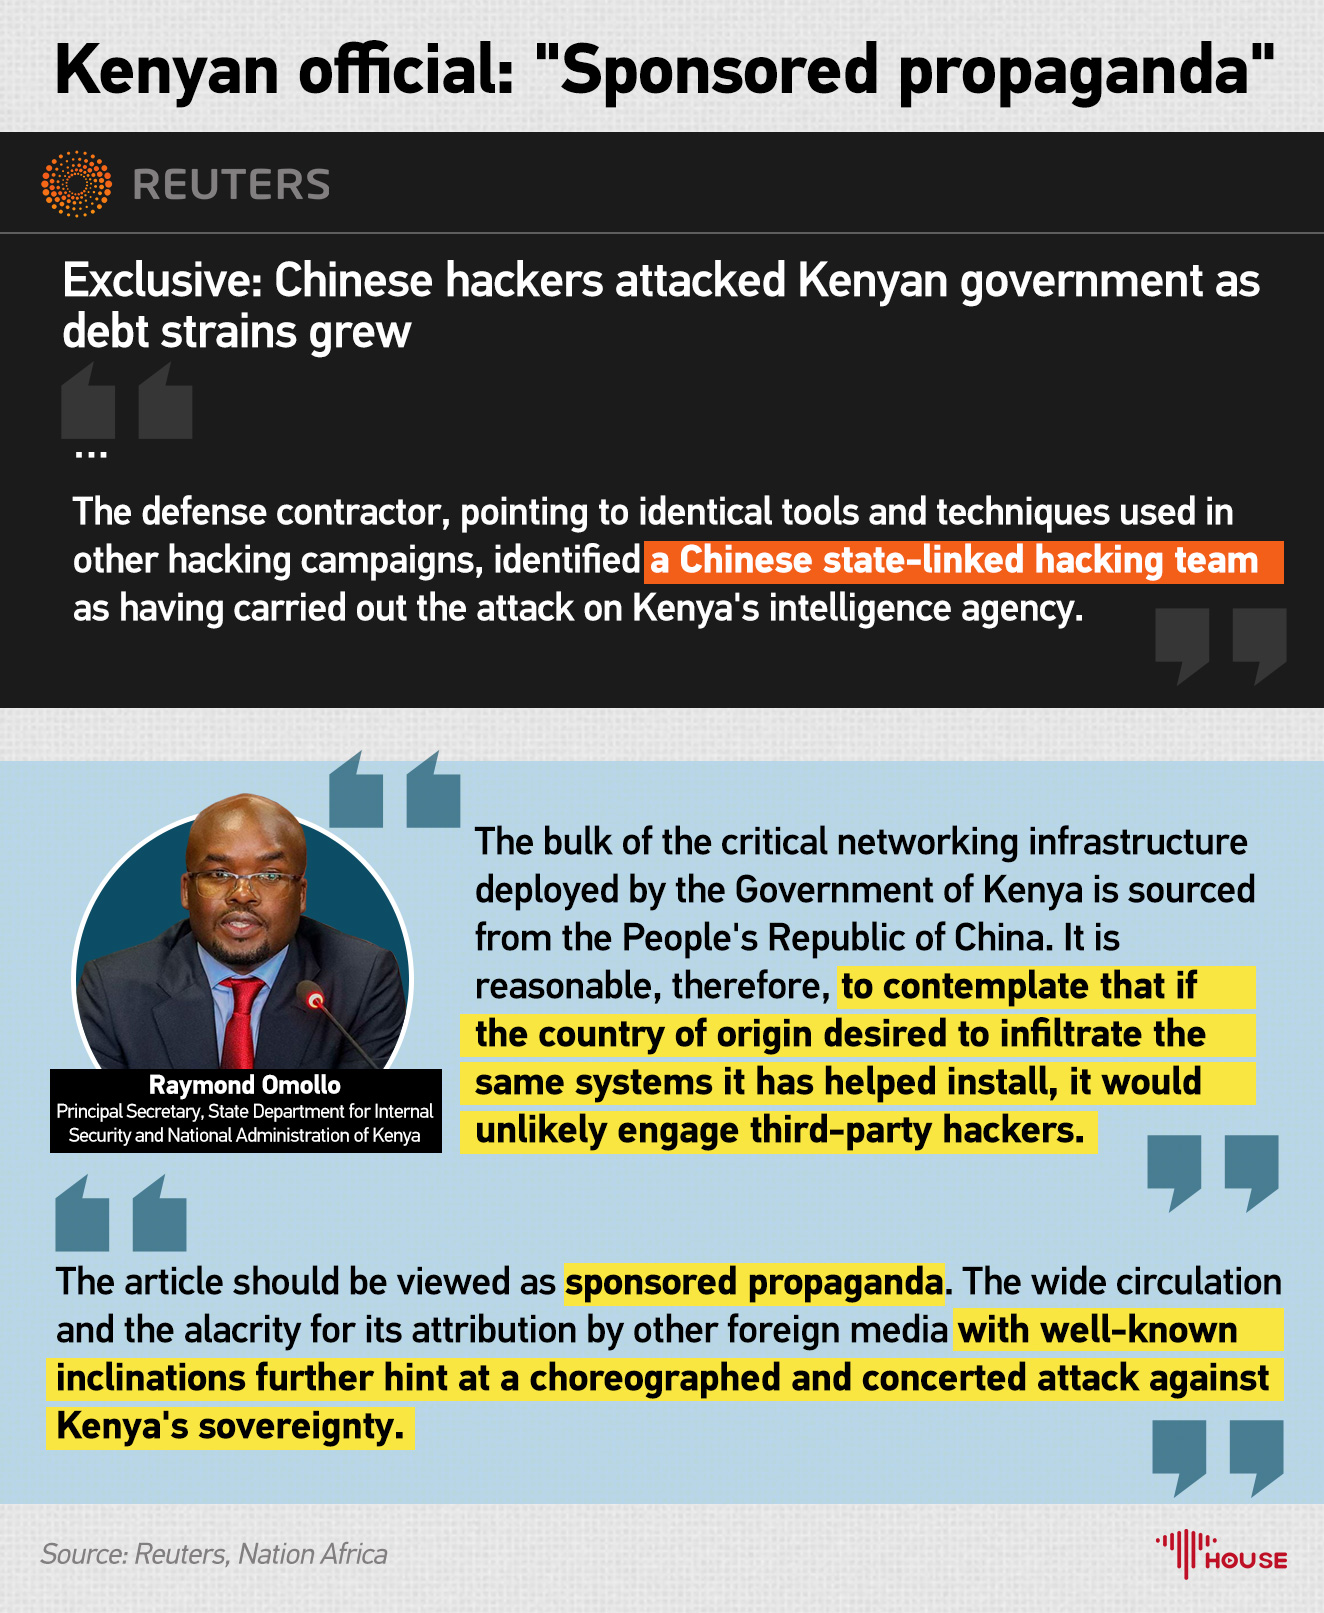 Kenya's official response to Reuters' China hacking allegation